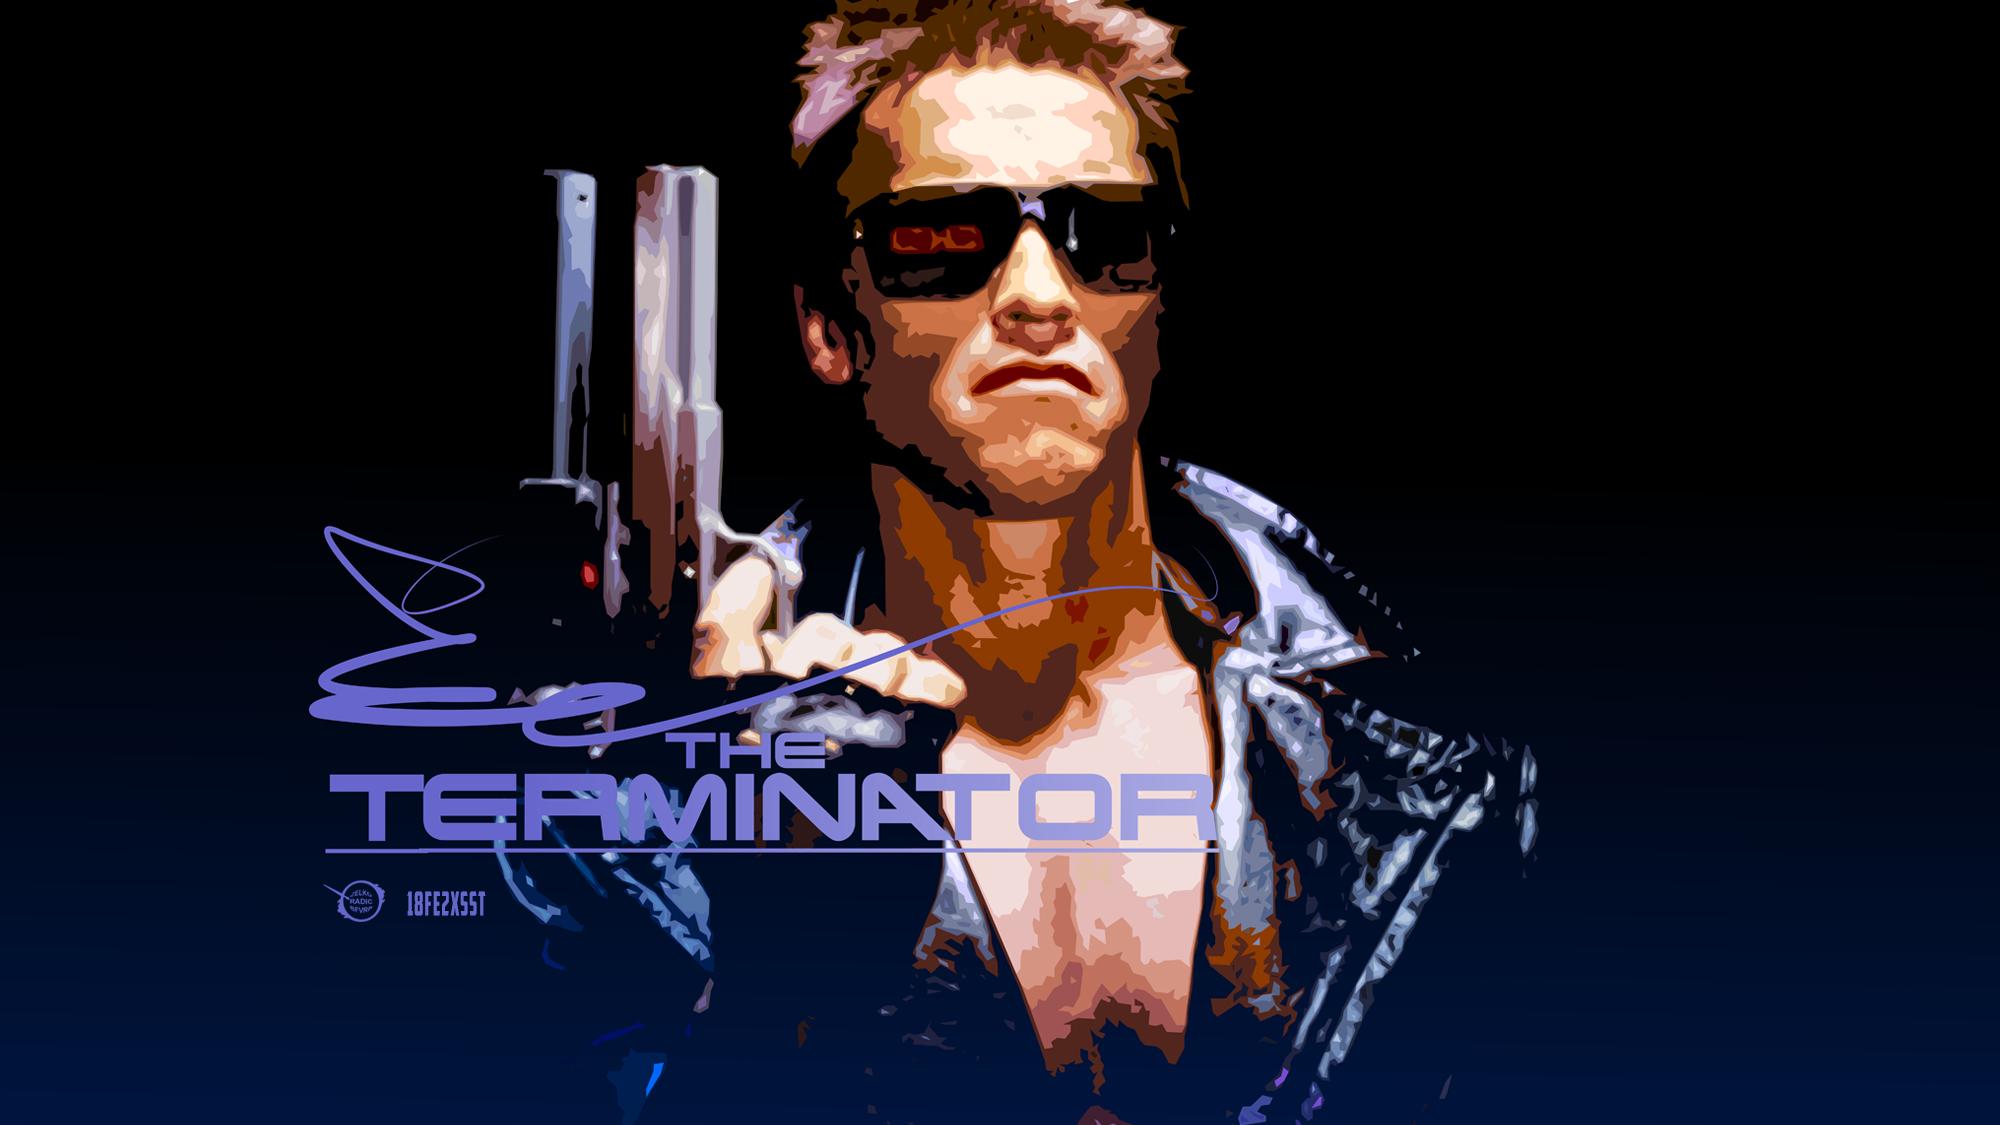 Wallpaper Blink of The Terminator Wallpaper HD for Android